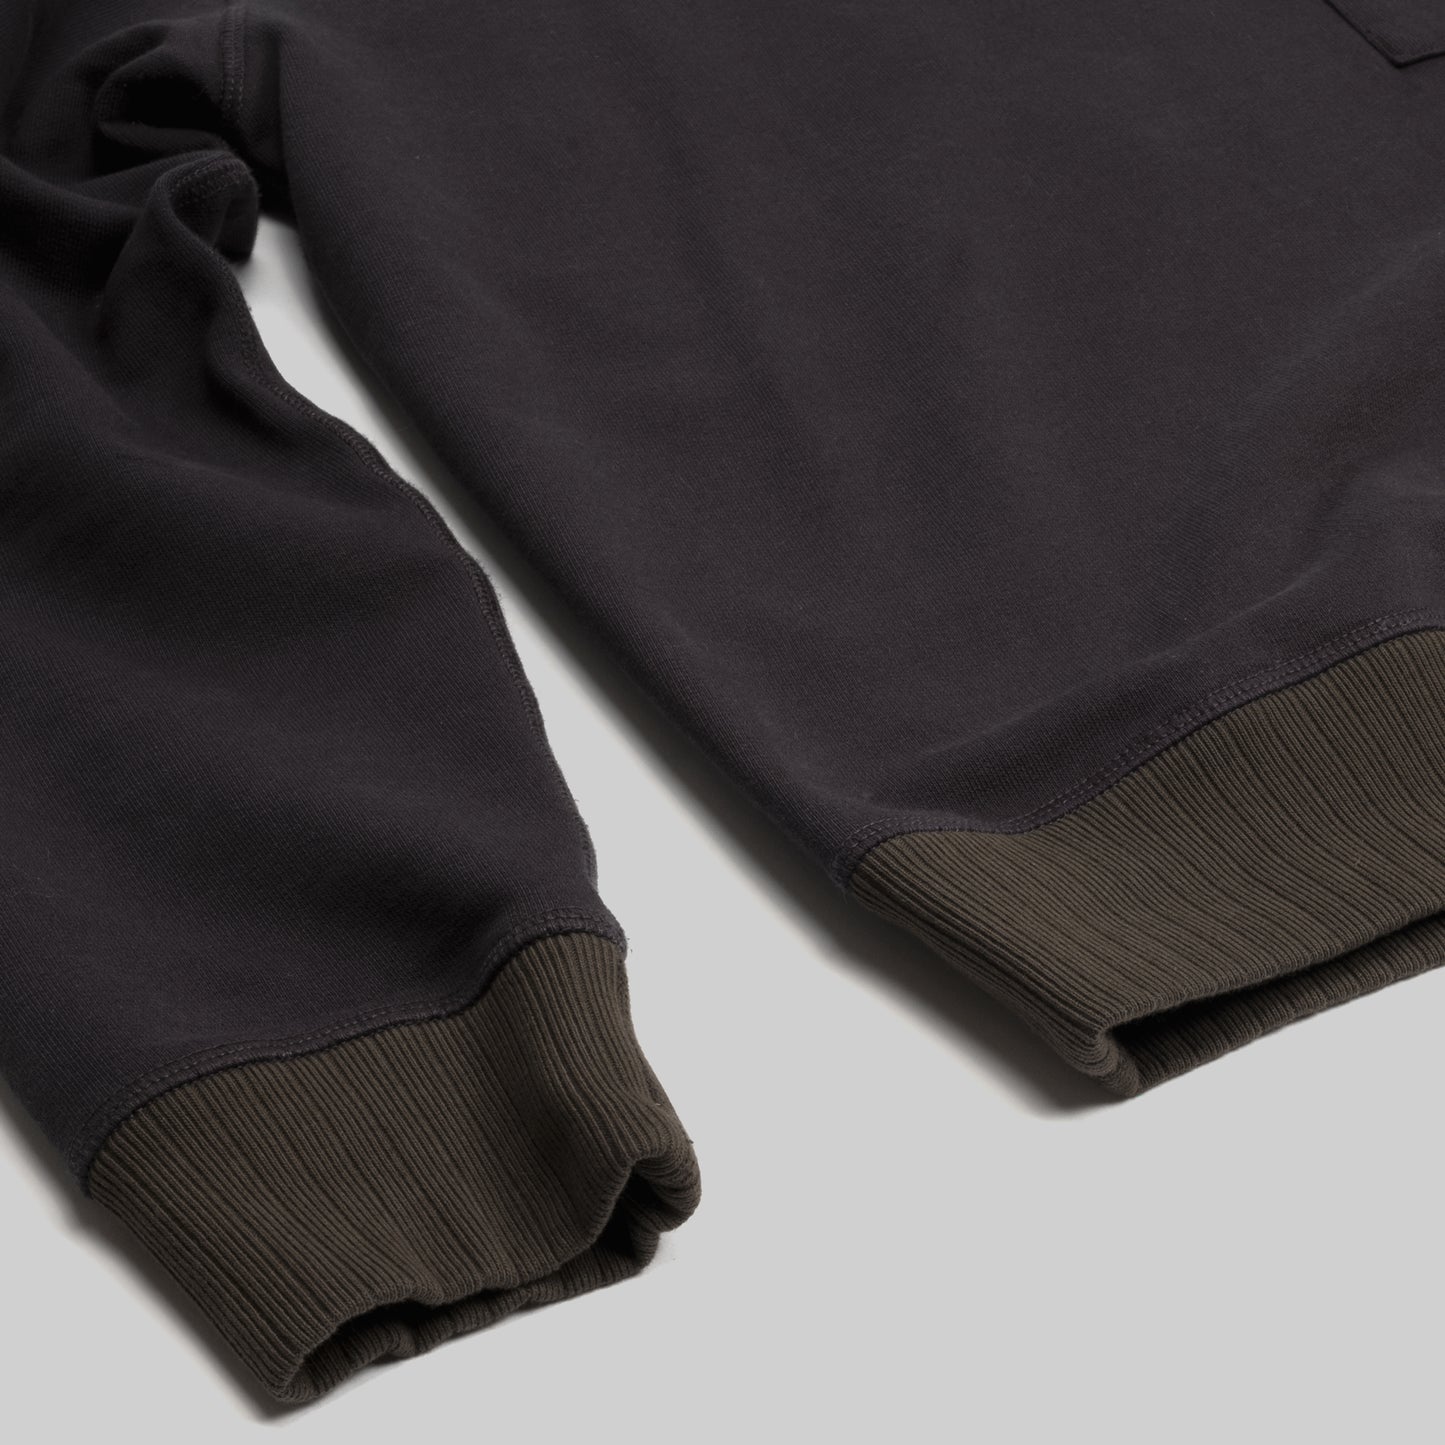 Fields French Terry Pocket Sweatshirt in Washed Black